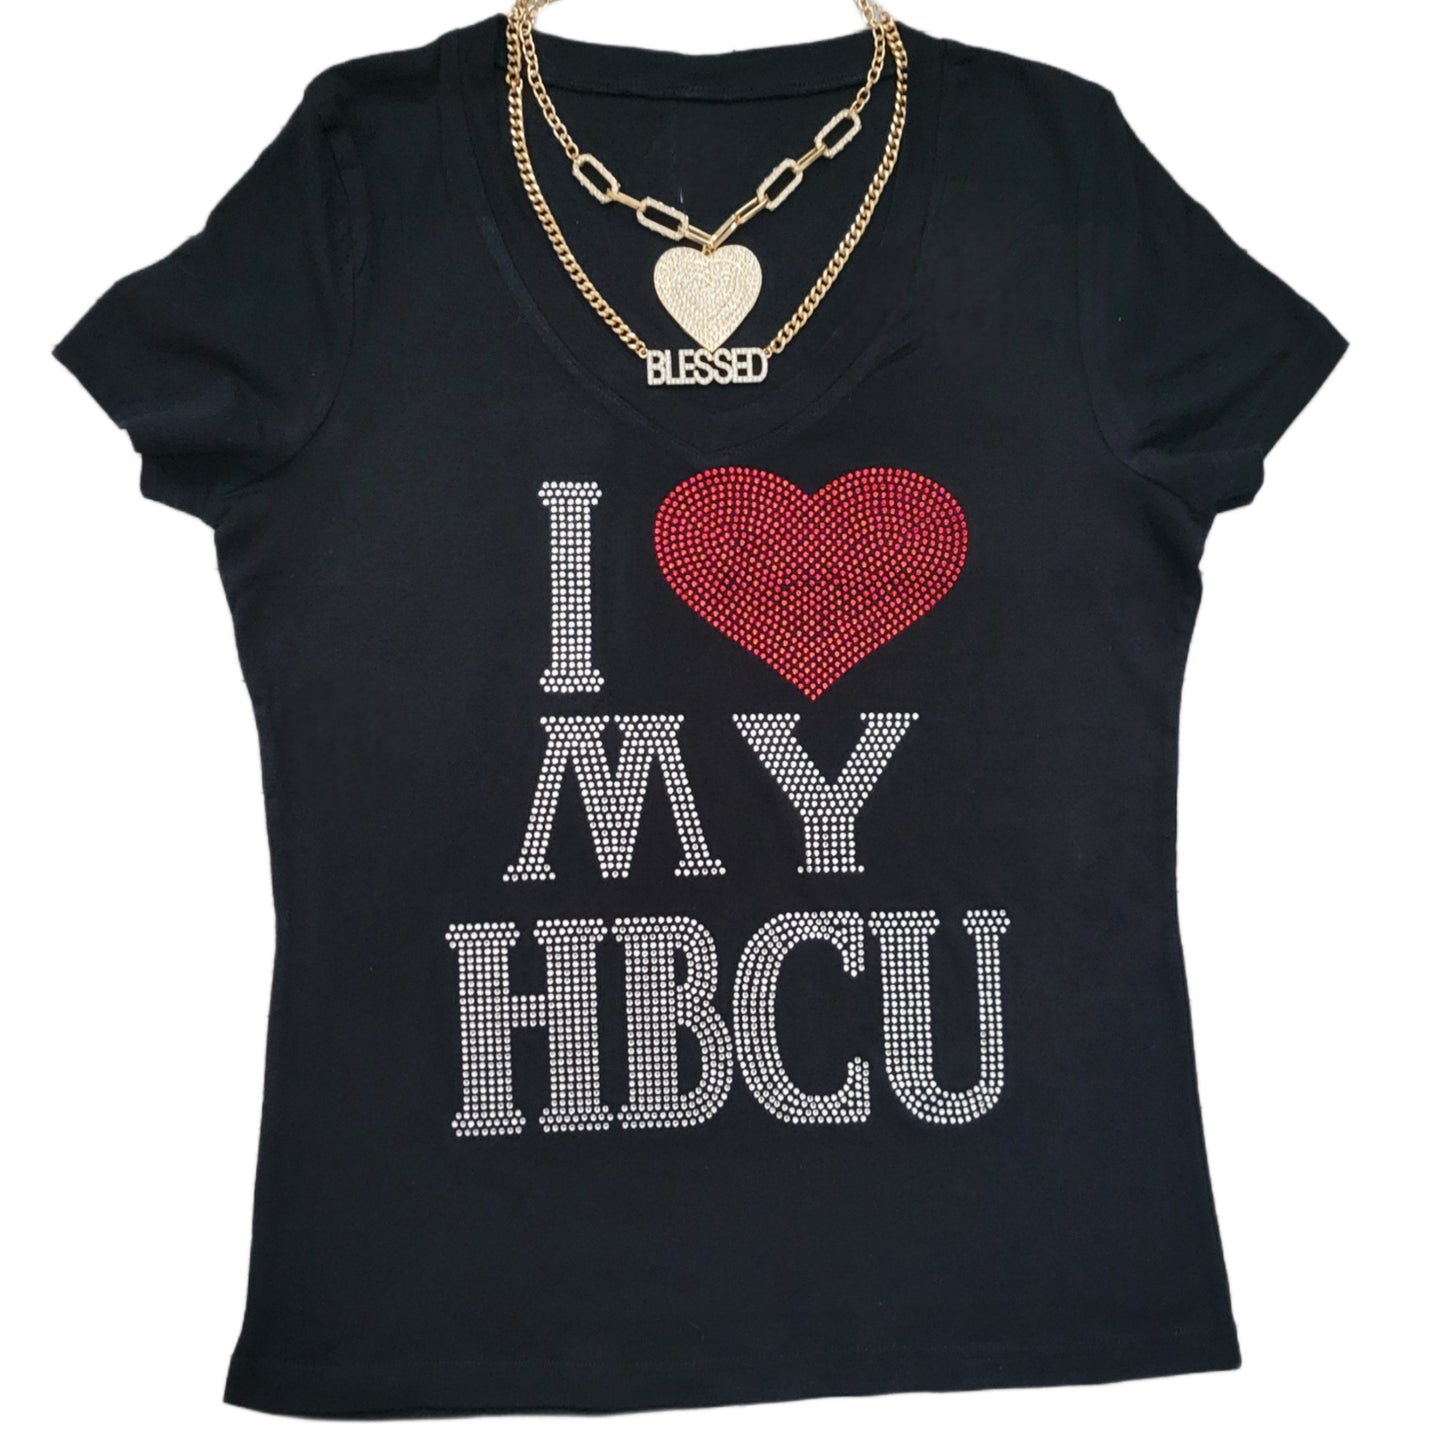 I Love My HBCU Statement Tee - Fitted